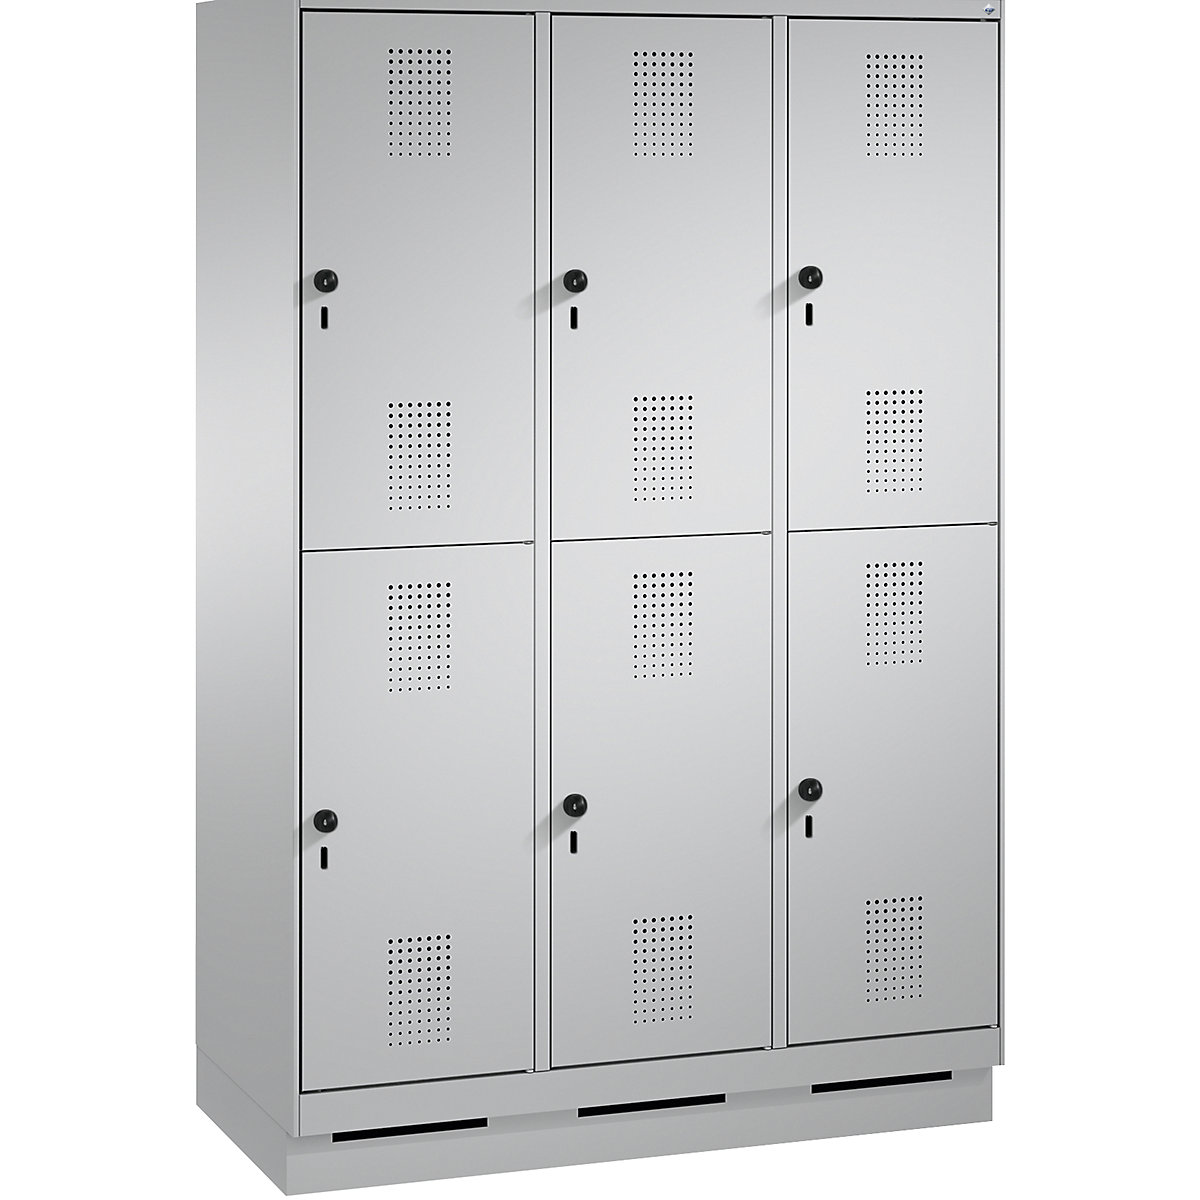 EVOLO cloakroom locker, double tier, with plinth – C+P, 3 compartments, 2 shelf compartments each, compartment width 400 mm, white aluminium / white aluminium-11